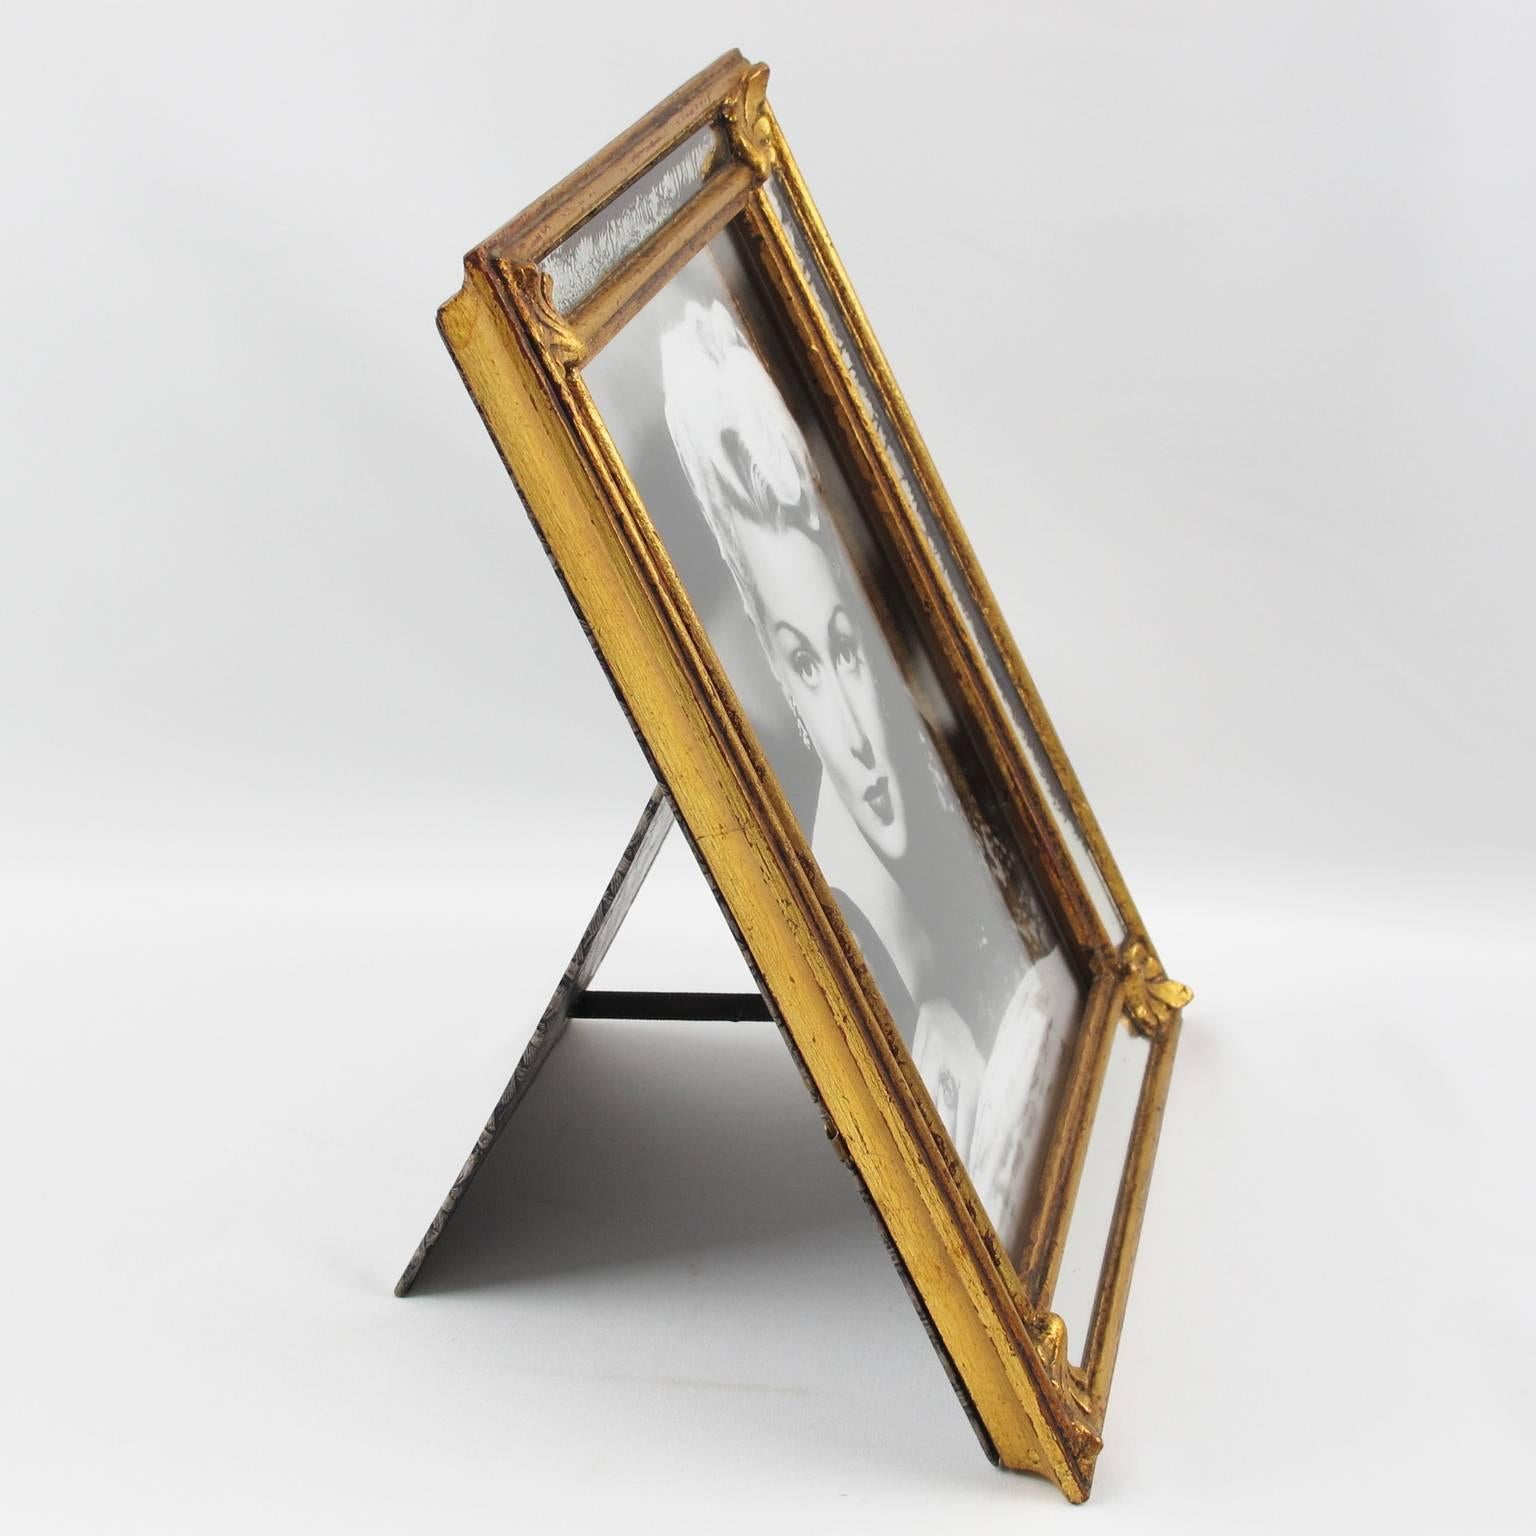 Vintage French gilded carved wood picture photo frame. Very nice dimensional shape with mirror parcloses. Fine vegetal carved patterns. Printed paper back and easel, circa 1950s.

Measurements: 
Overall: 9.44 in. wide (24 cm) x 11.82 in. high (30